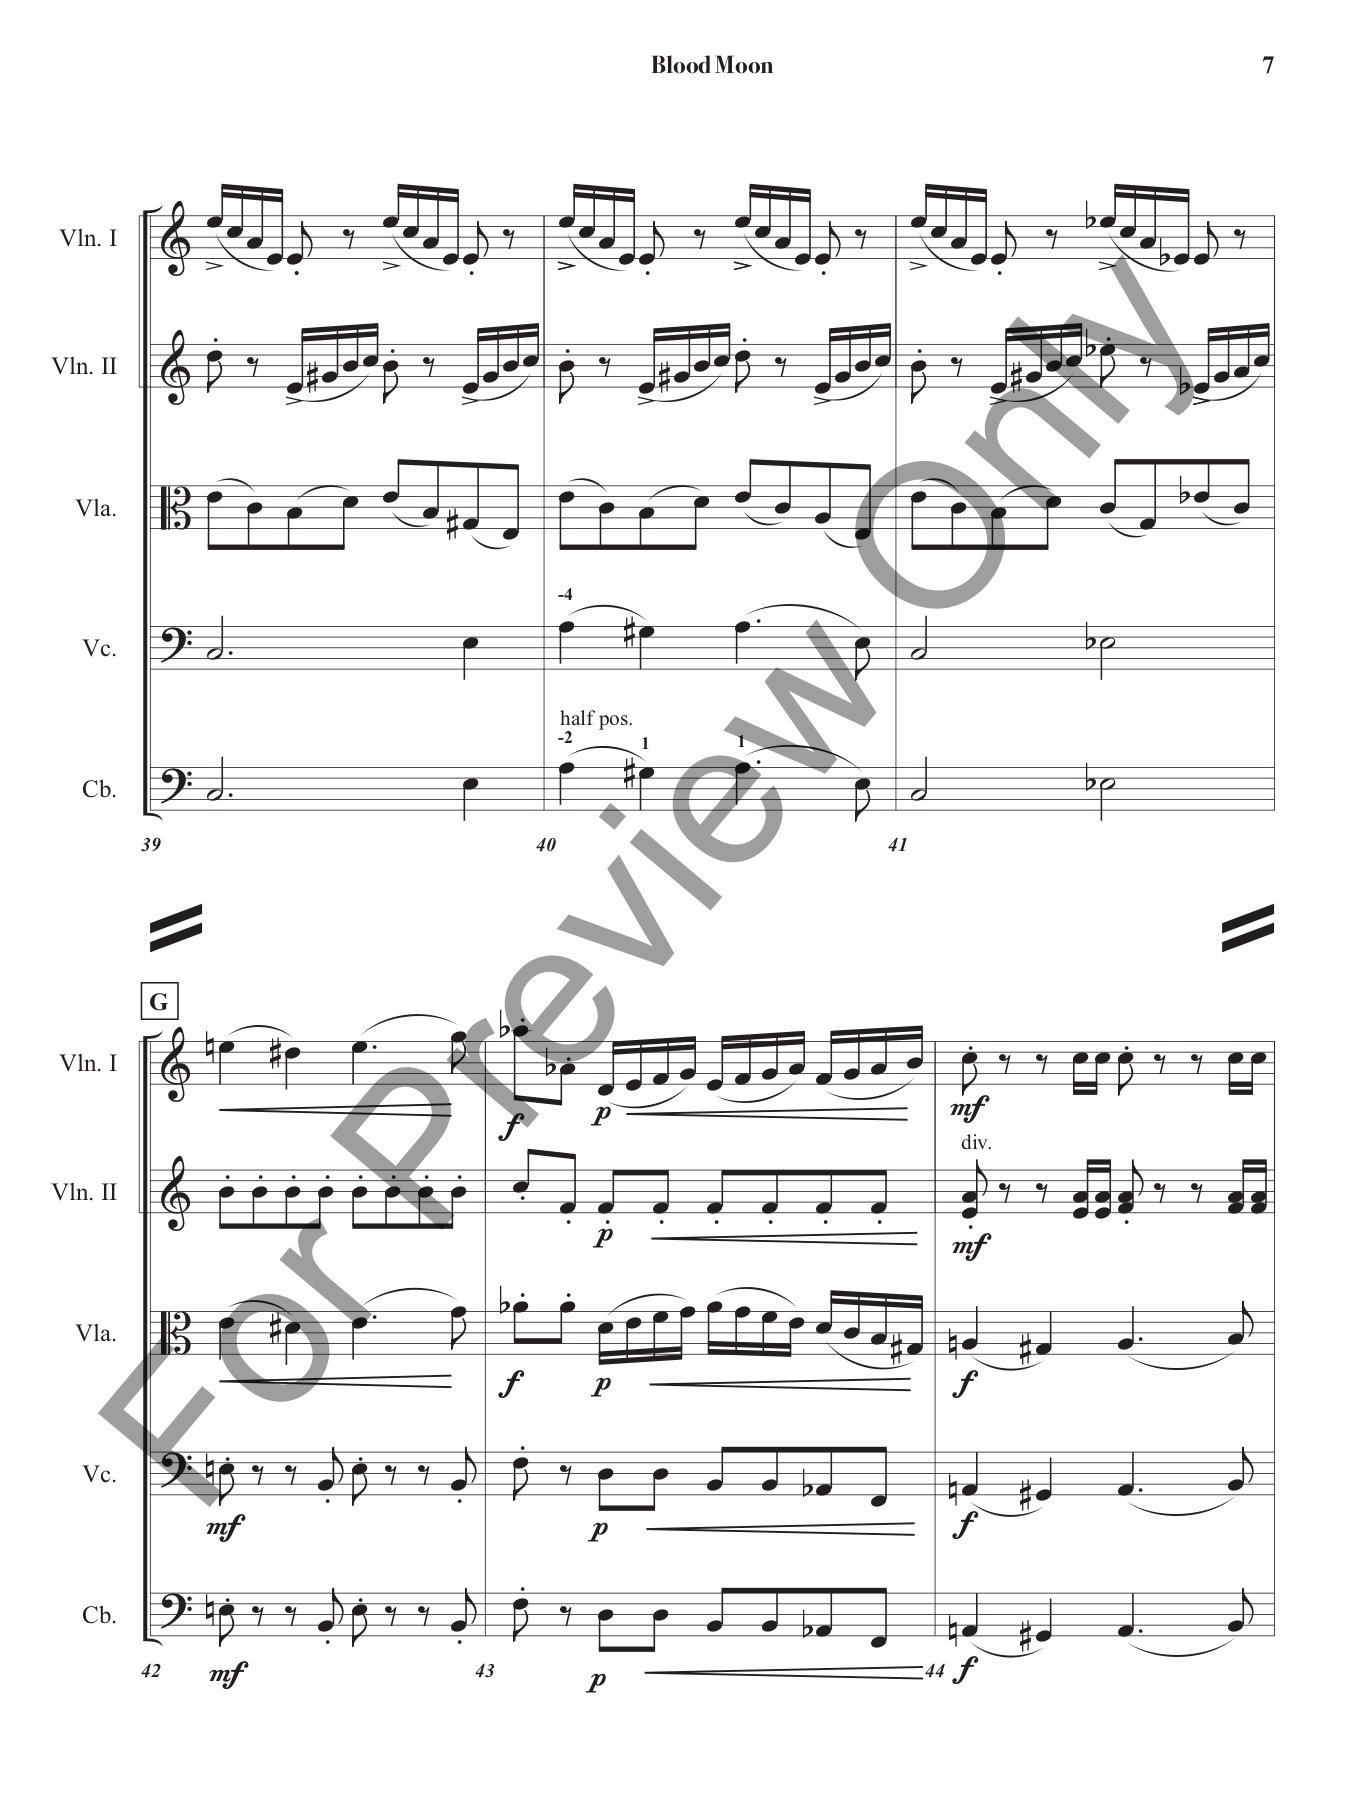 Blood Moon for String Orchestra - Cover Page and Full Score Only (for Preview Only p9).jpg